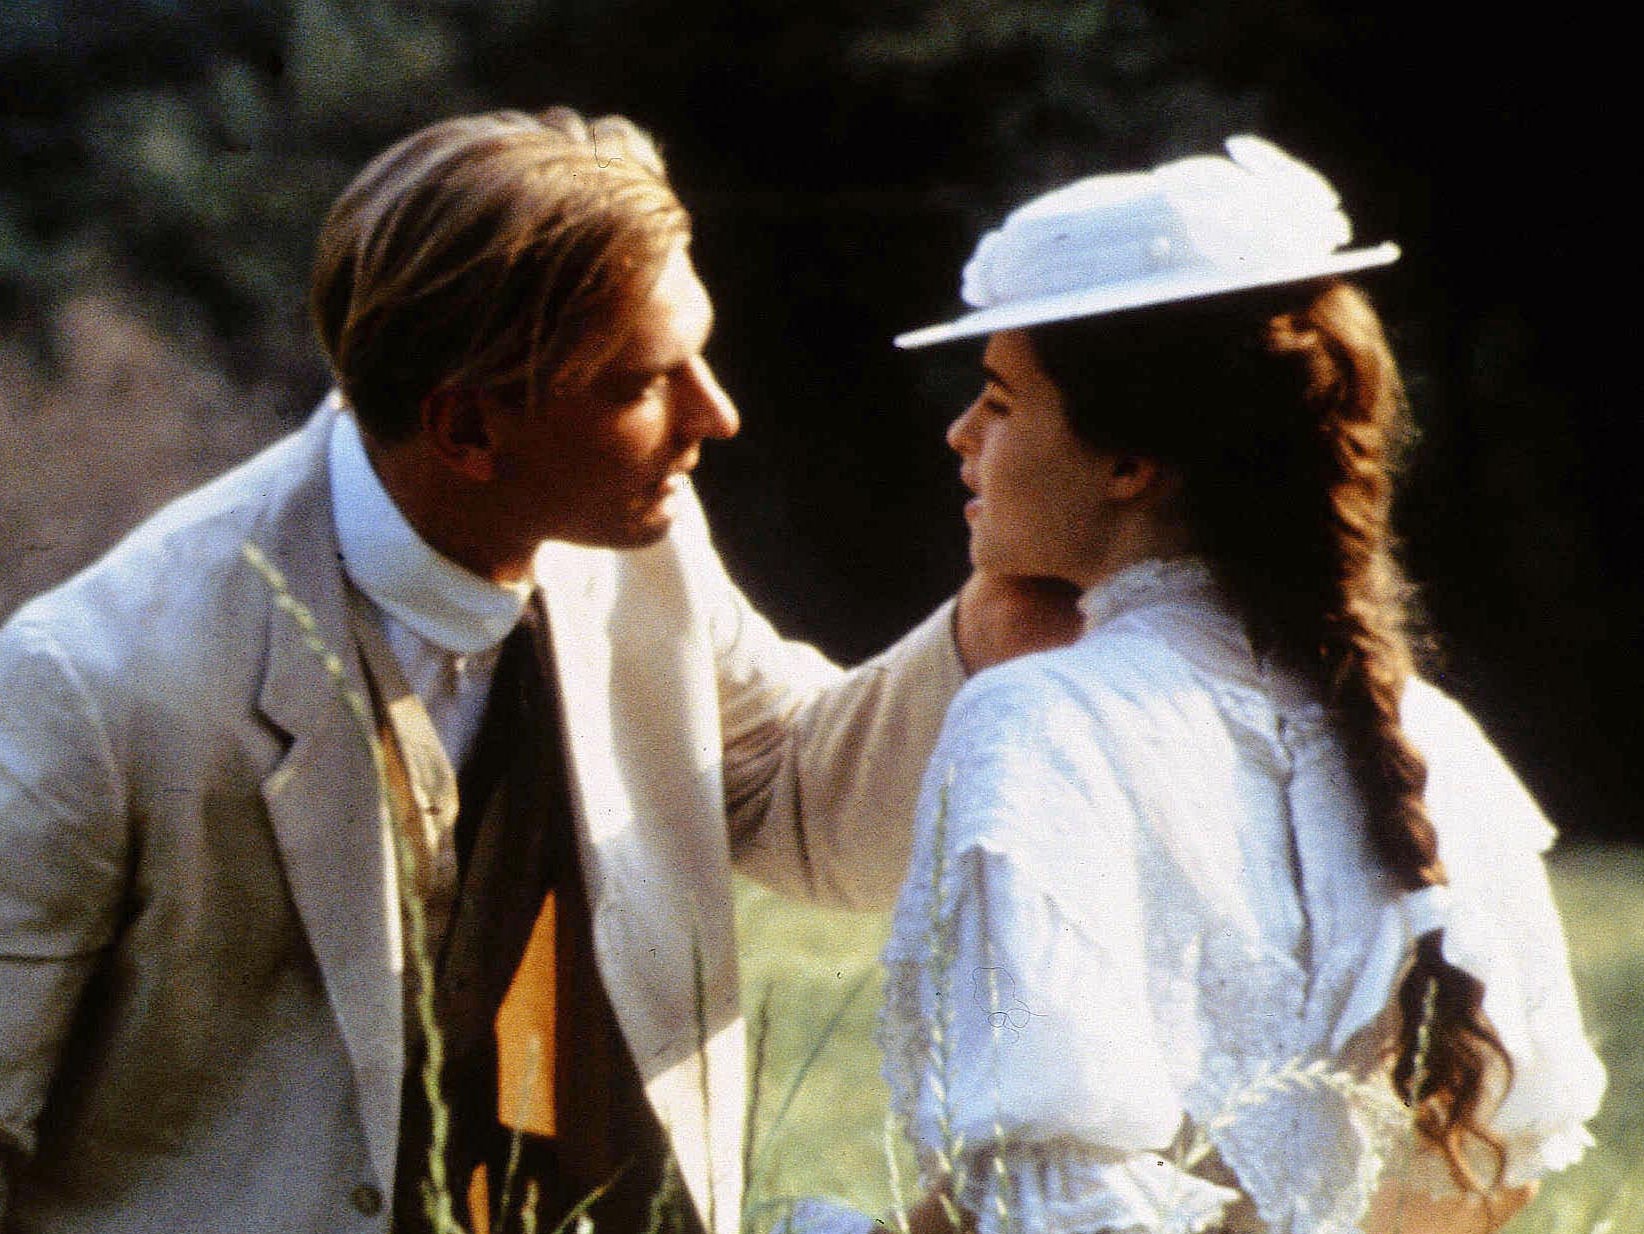 Julian Sands and Helena Bonham Carter in ‘A Room with a View'